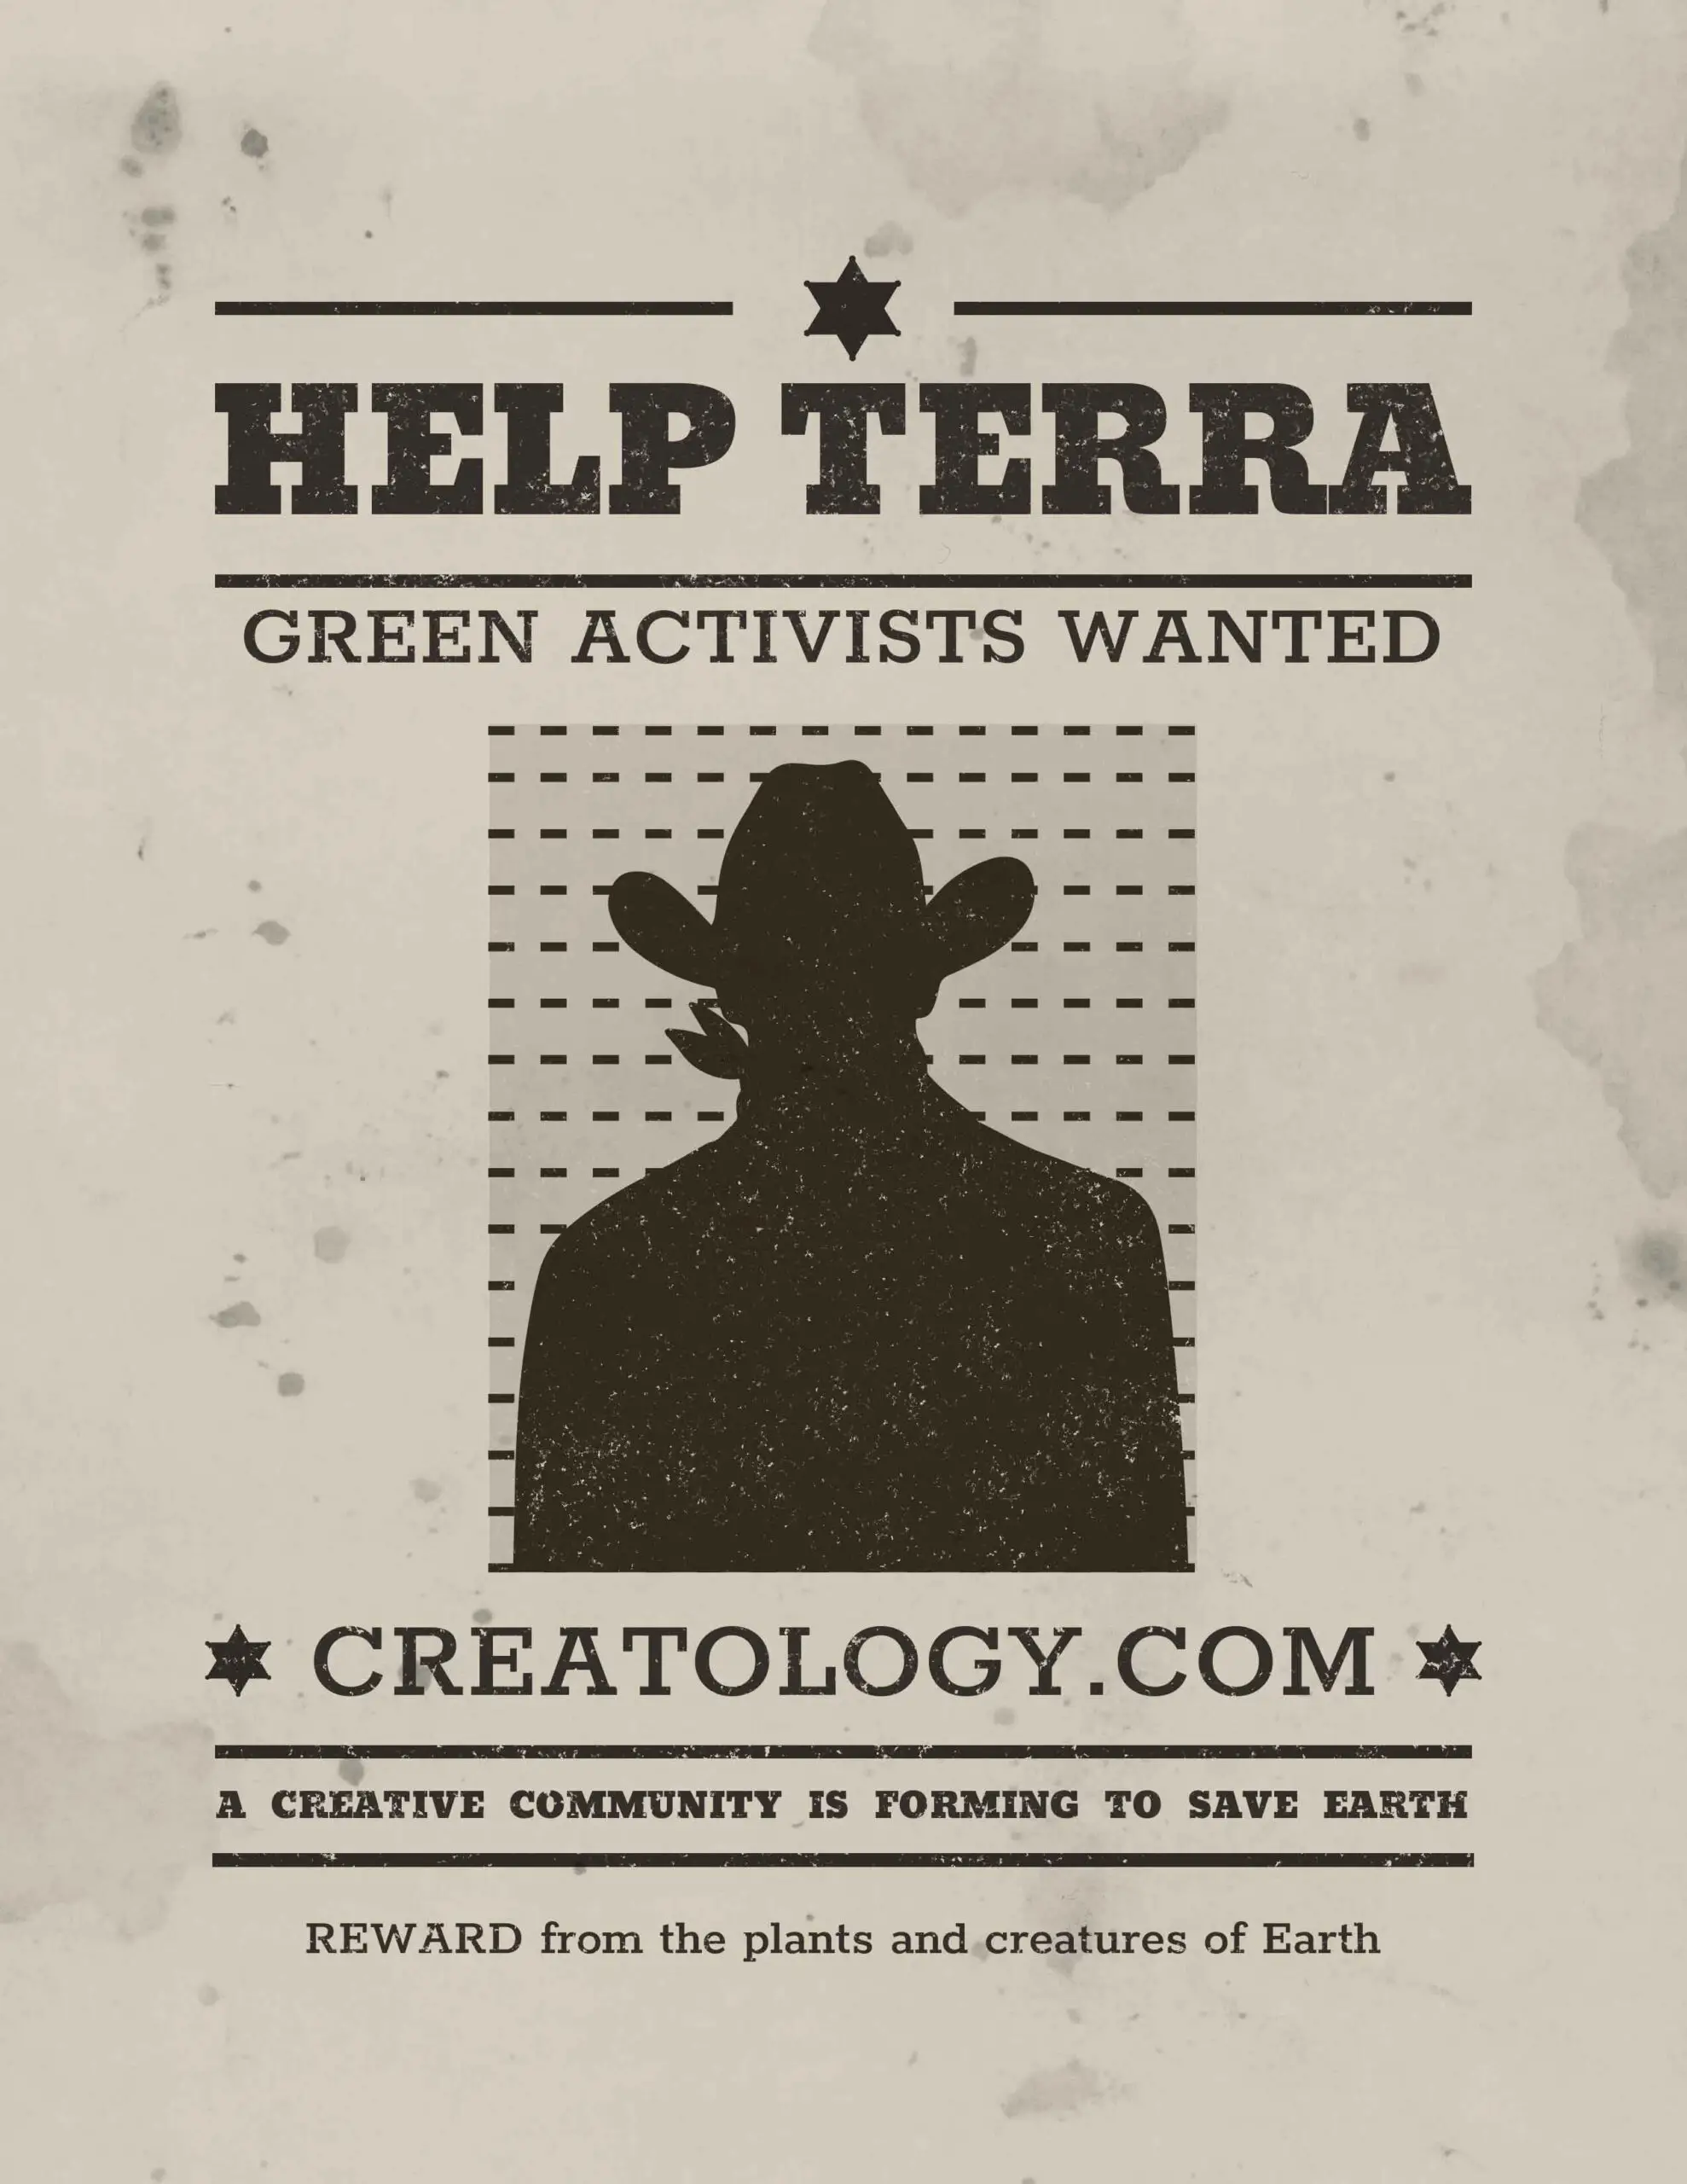 A parody of an Old West wanted poster frames the silhouette of a man in a cowboy hat with text messages: “Help Terra; Green activists wanted; a creative community is forming to save Earth; Reward; and Creatology.com.”